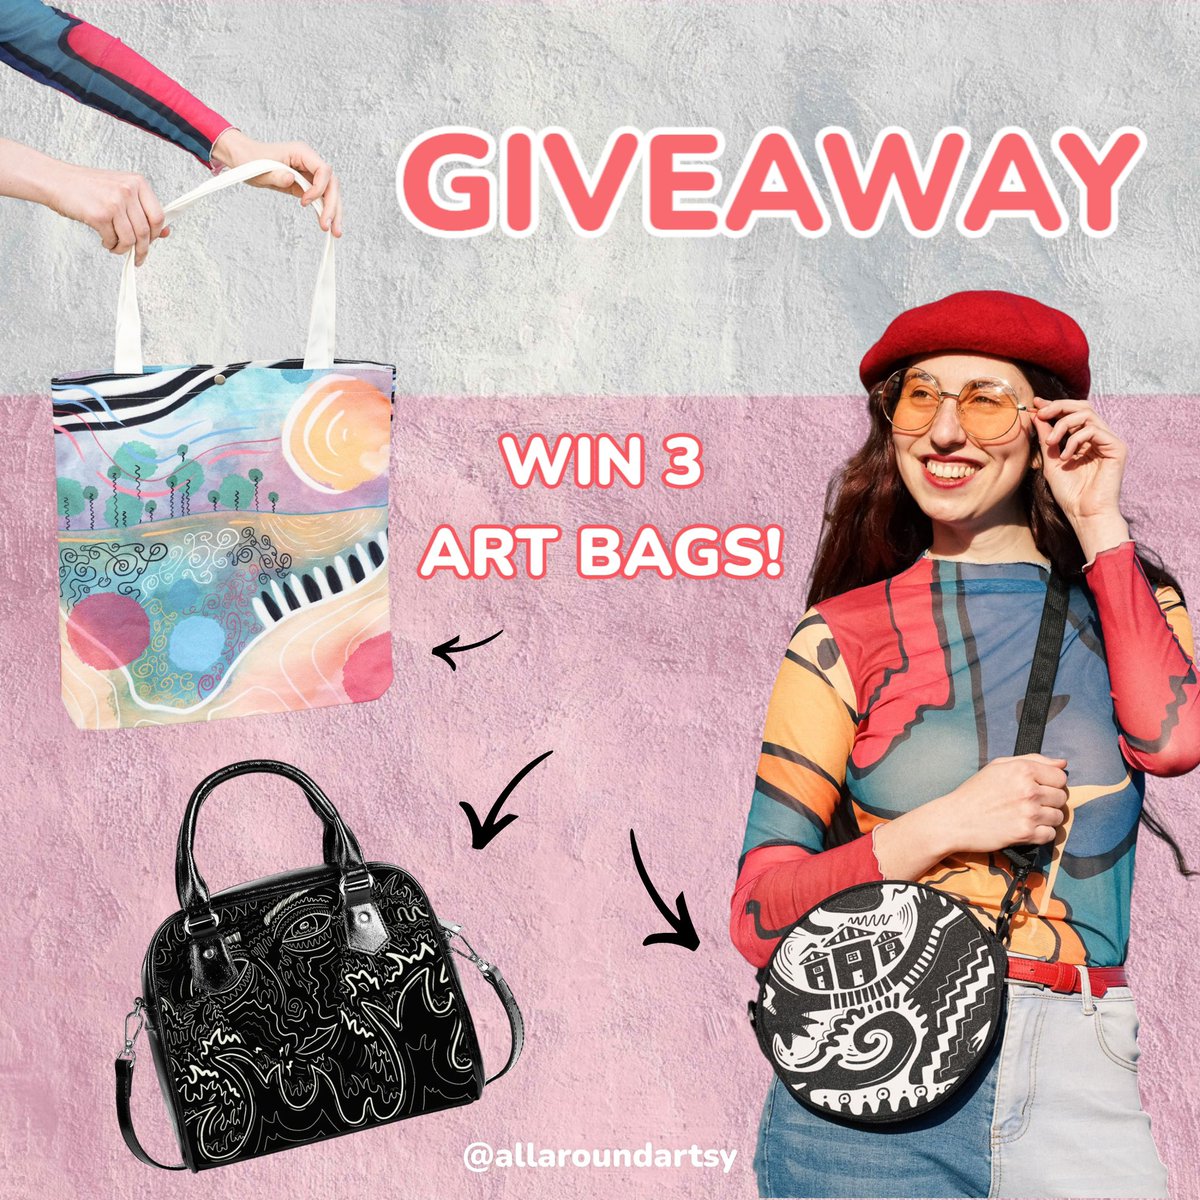 Hey fashion friends!! I decided to have a little fun today and run a giveaway on my Instagram! I'm giving away all 3 of my new original art bags! YAY! 🎁✨ If you're interested, here's where you can enter: instagram.com/p/C6G-JCiAqh-/…